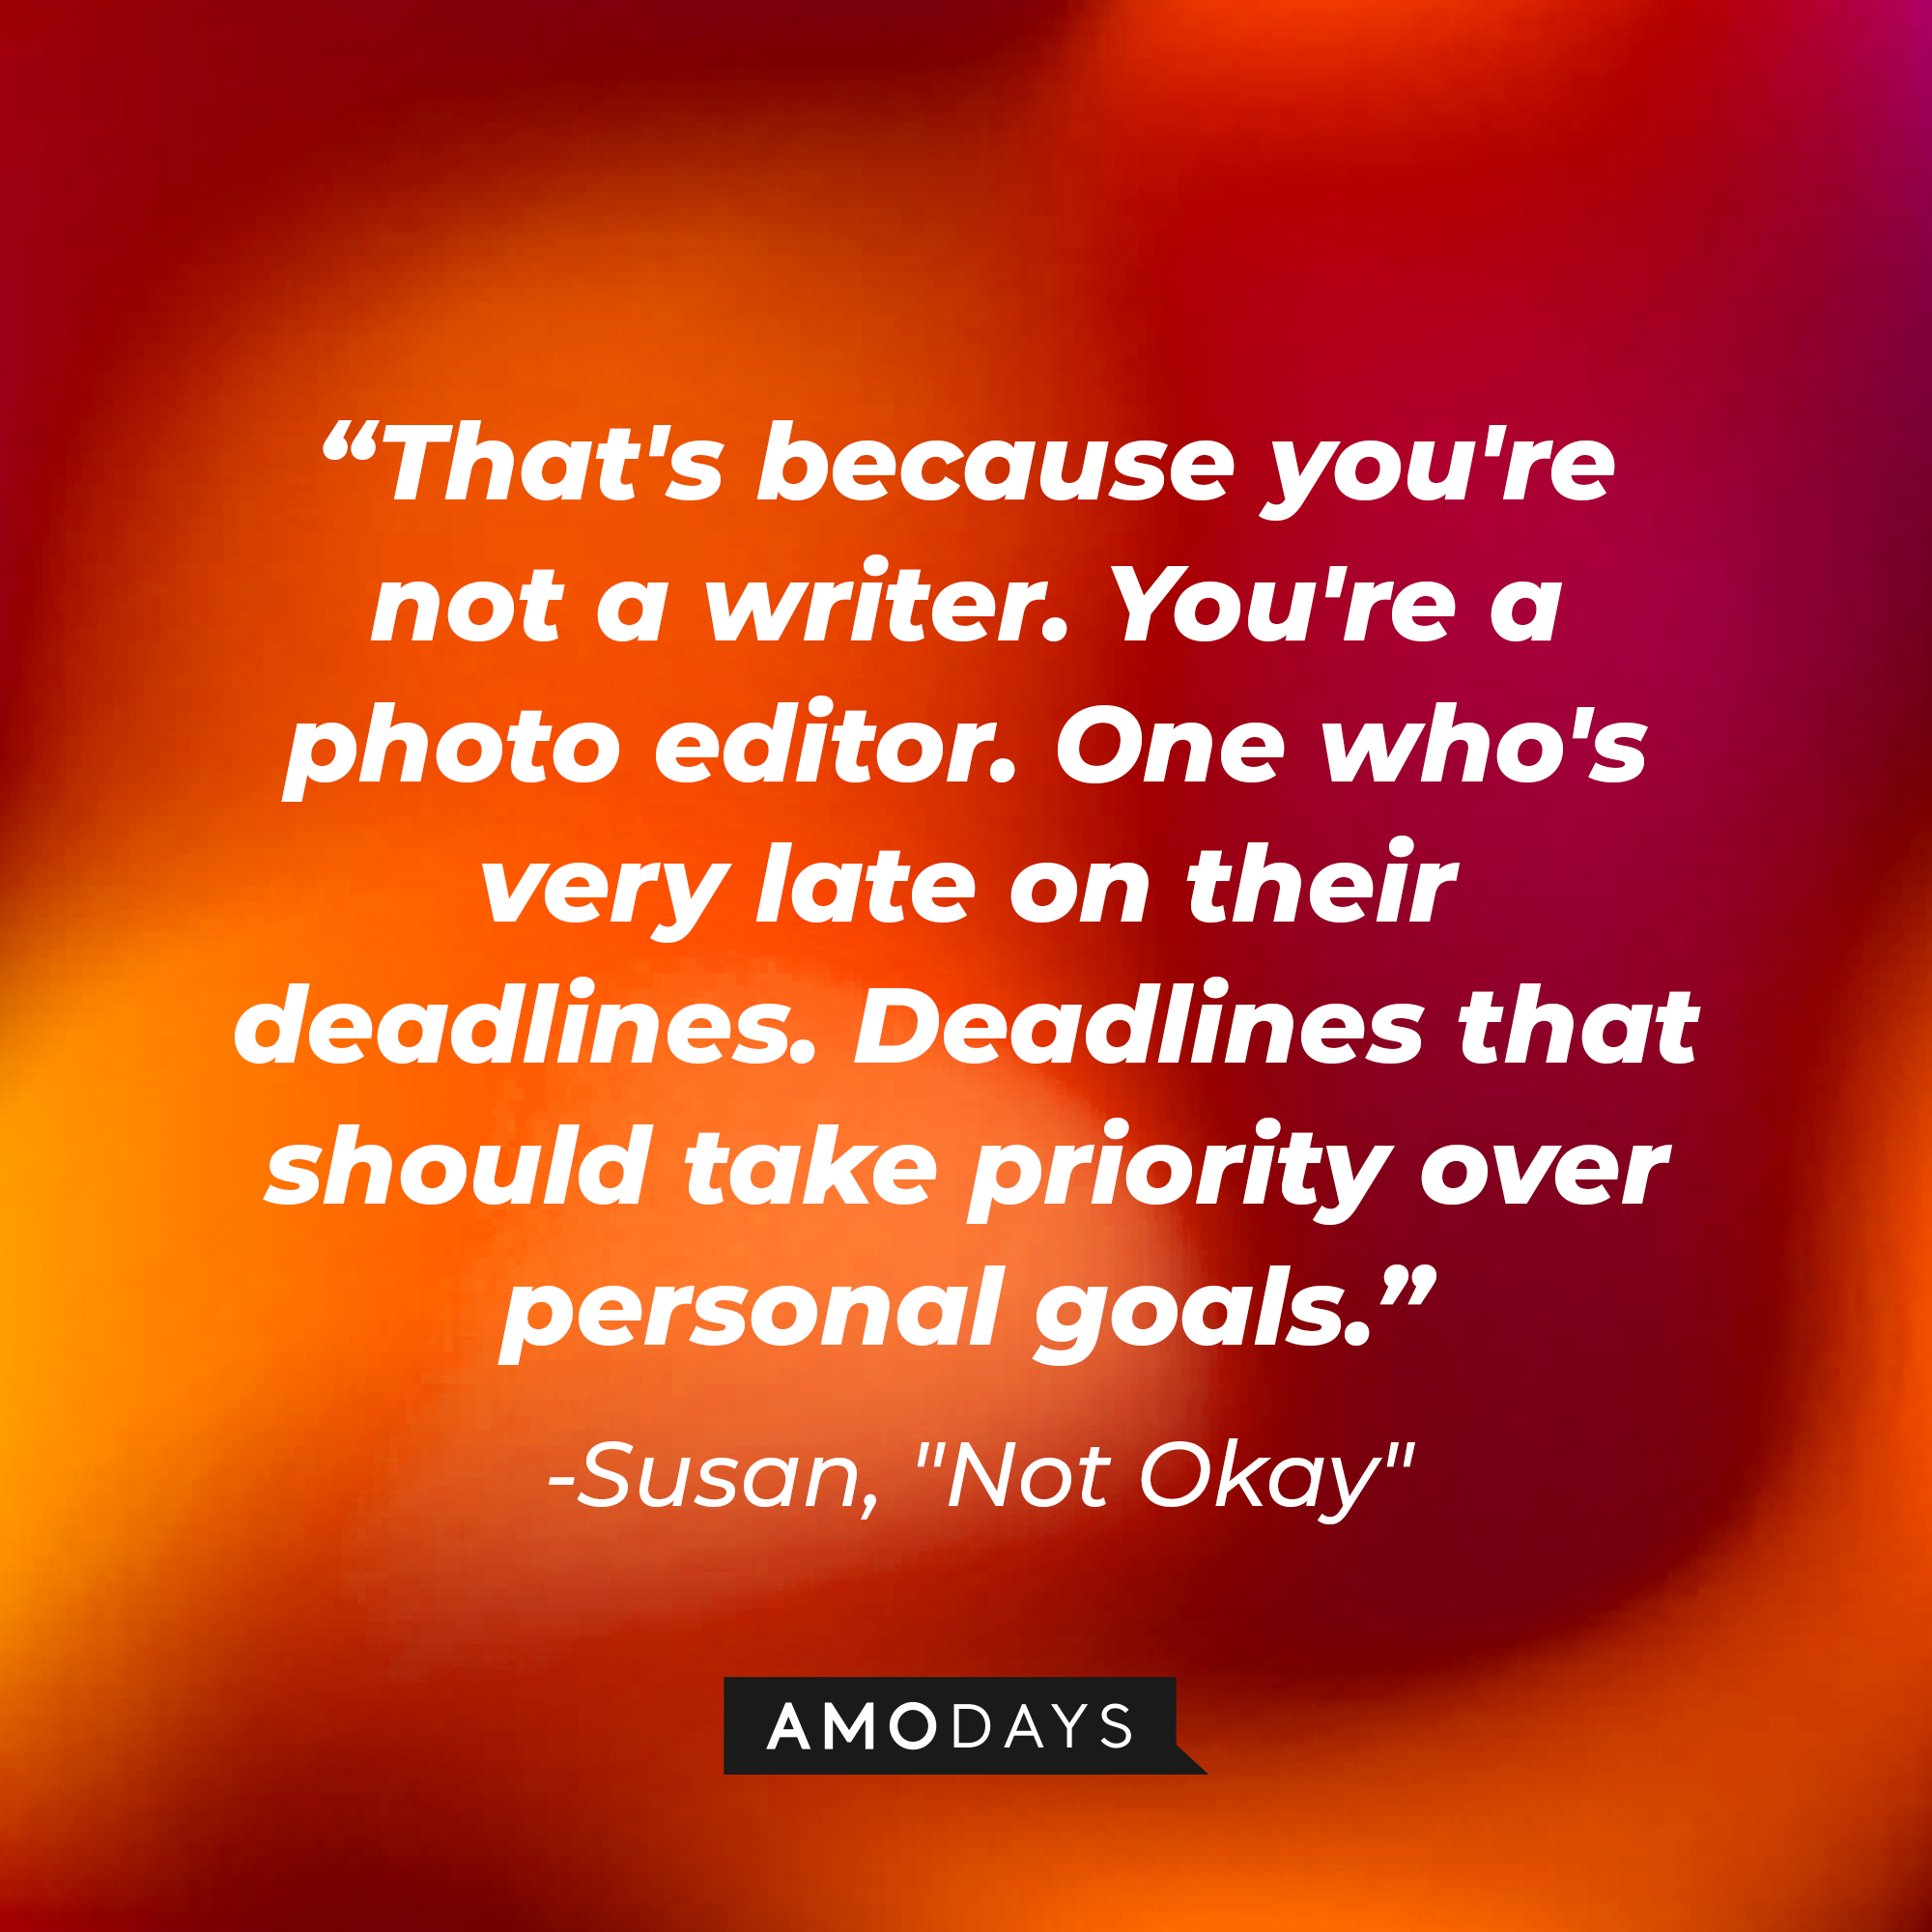 Susan's quote: "That's because you're not a writer. You're a photo editor. One who's very late on their deadlines. Deadlines that should take priority over personal goals." | Source: AmoDays